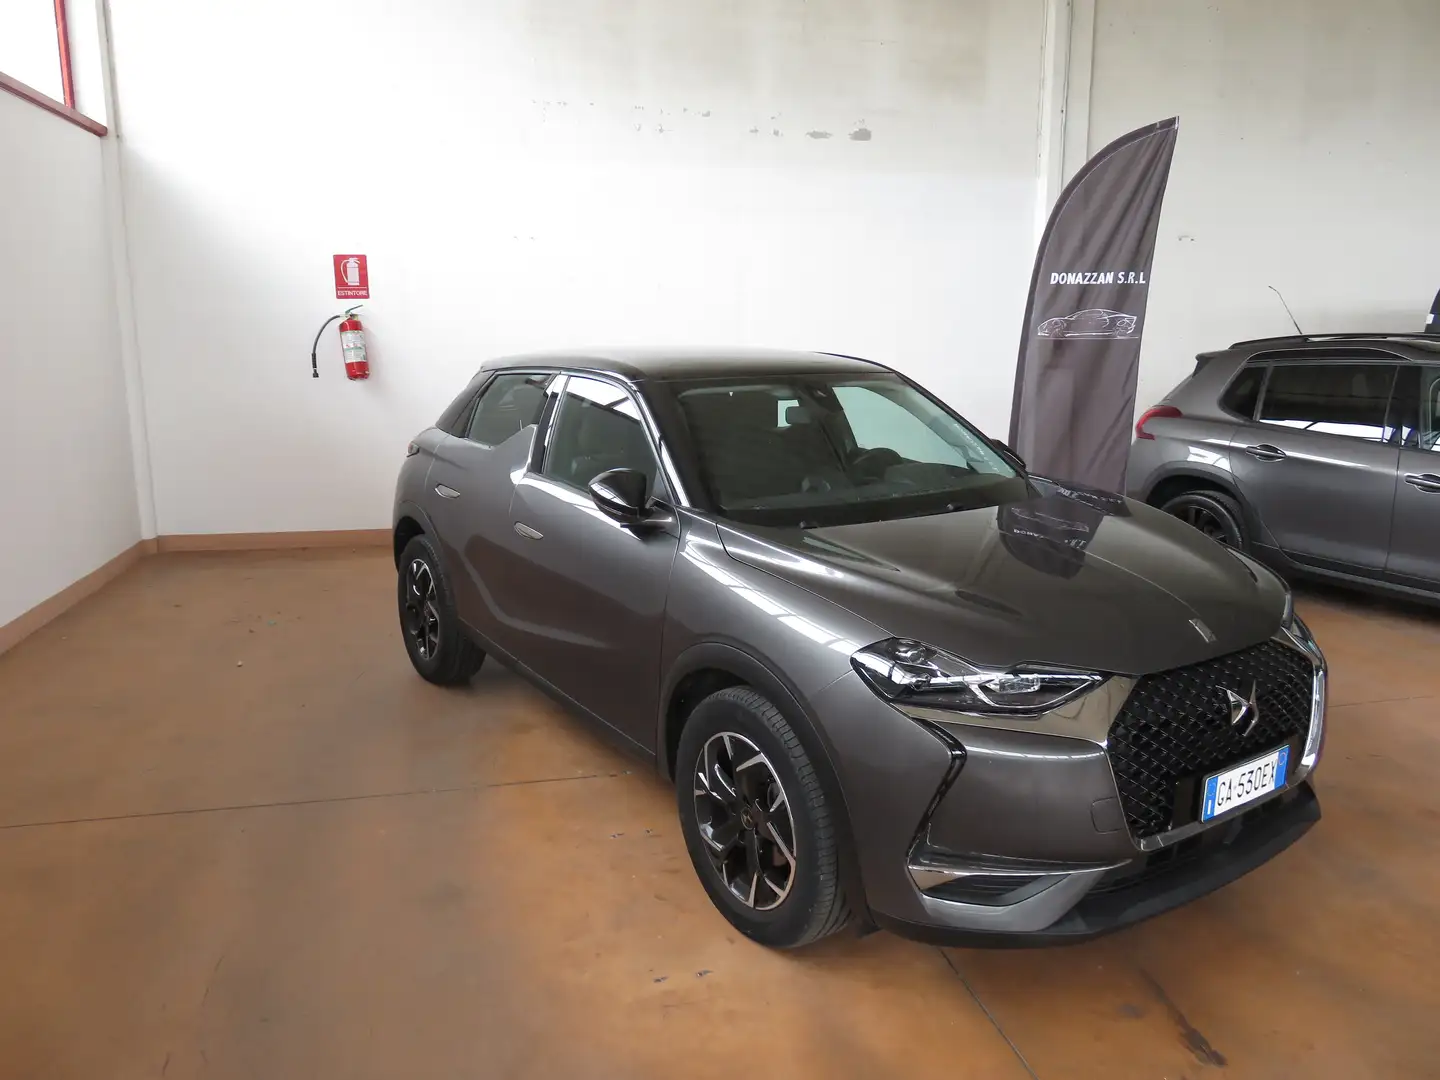 DS Automobiles DS 3 Crossback DS3 Crossback 1.5 bluehdi Business 100cv siva - 2